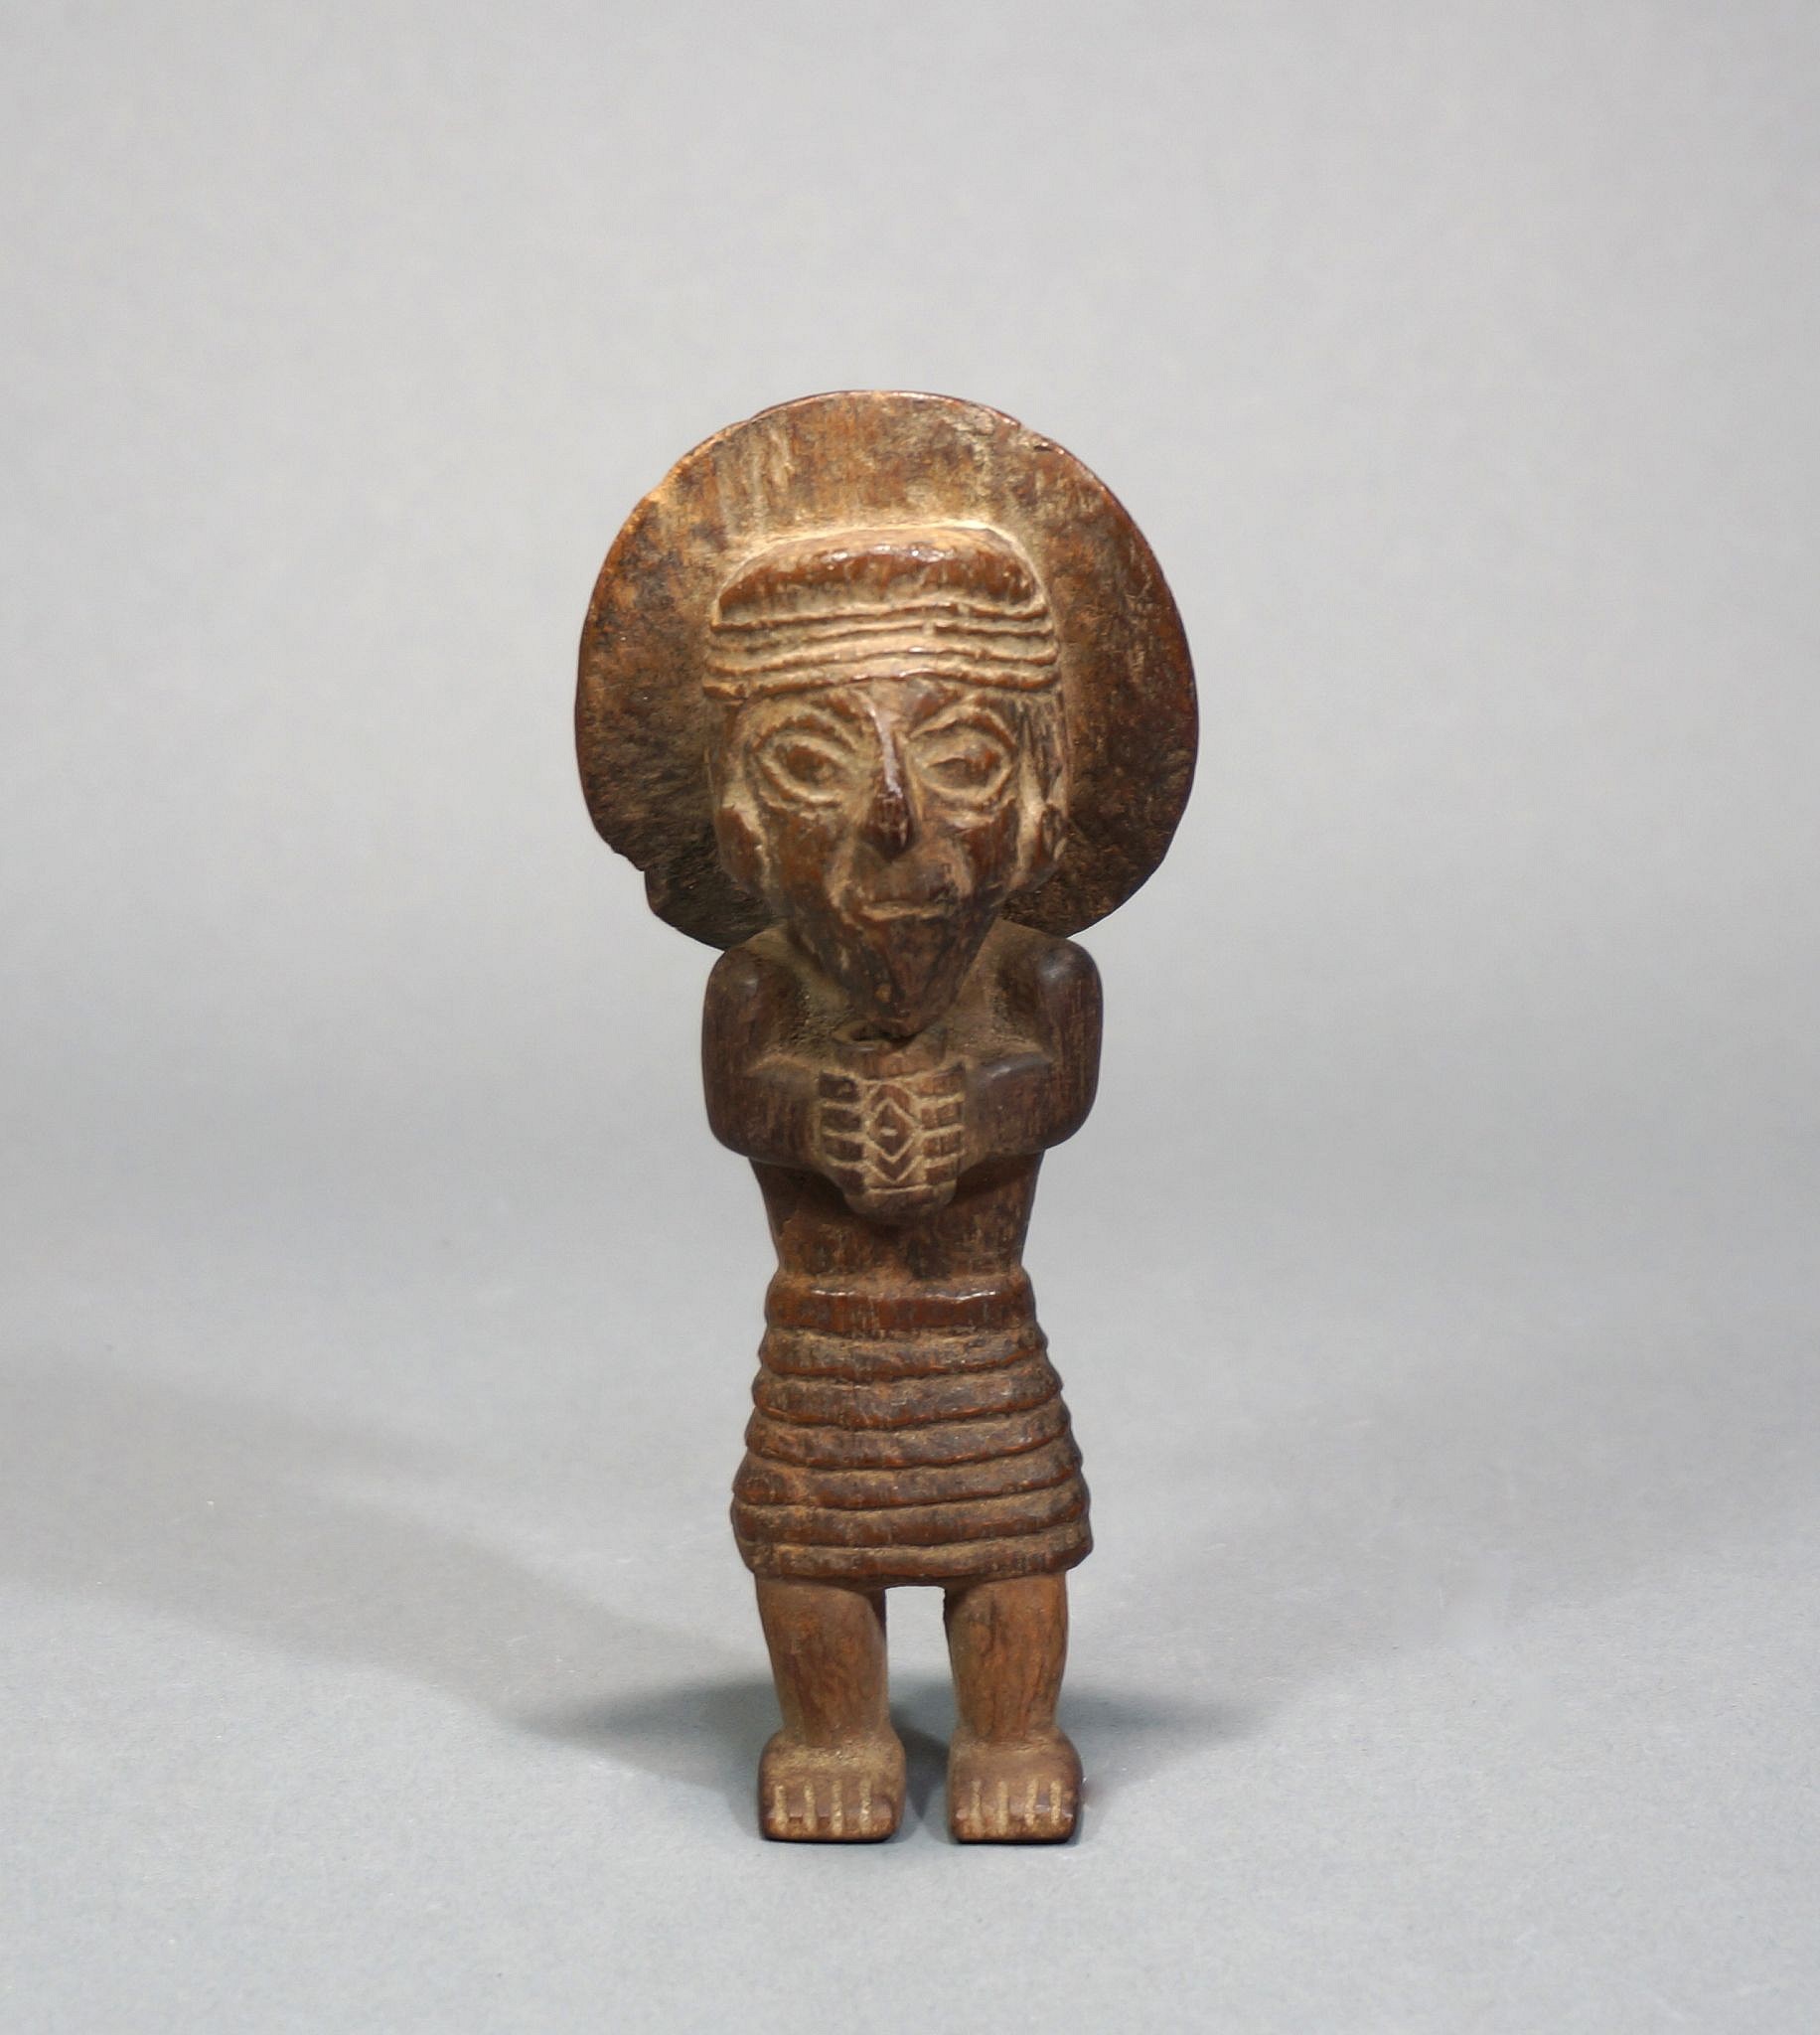 Peru, Wooden Man
Effigy figure of a high status individual wearing an unusual circular feather head dress and holding a kero.  The shirt is also unusual, with a multi-layered construction.
Media: Wood
Dimensions: h: 5 3/4"
Price Upon Request
n4004